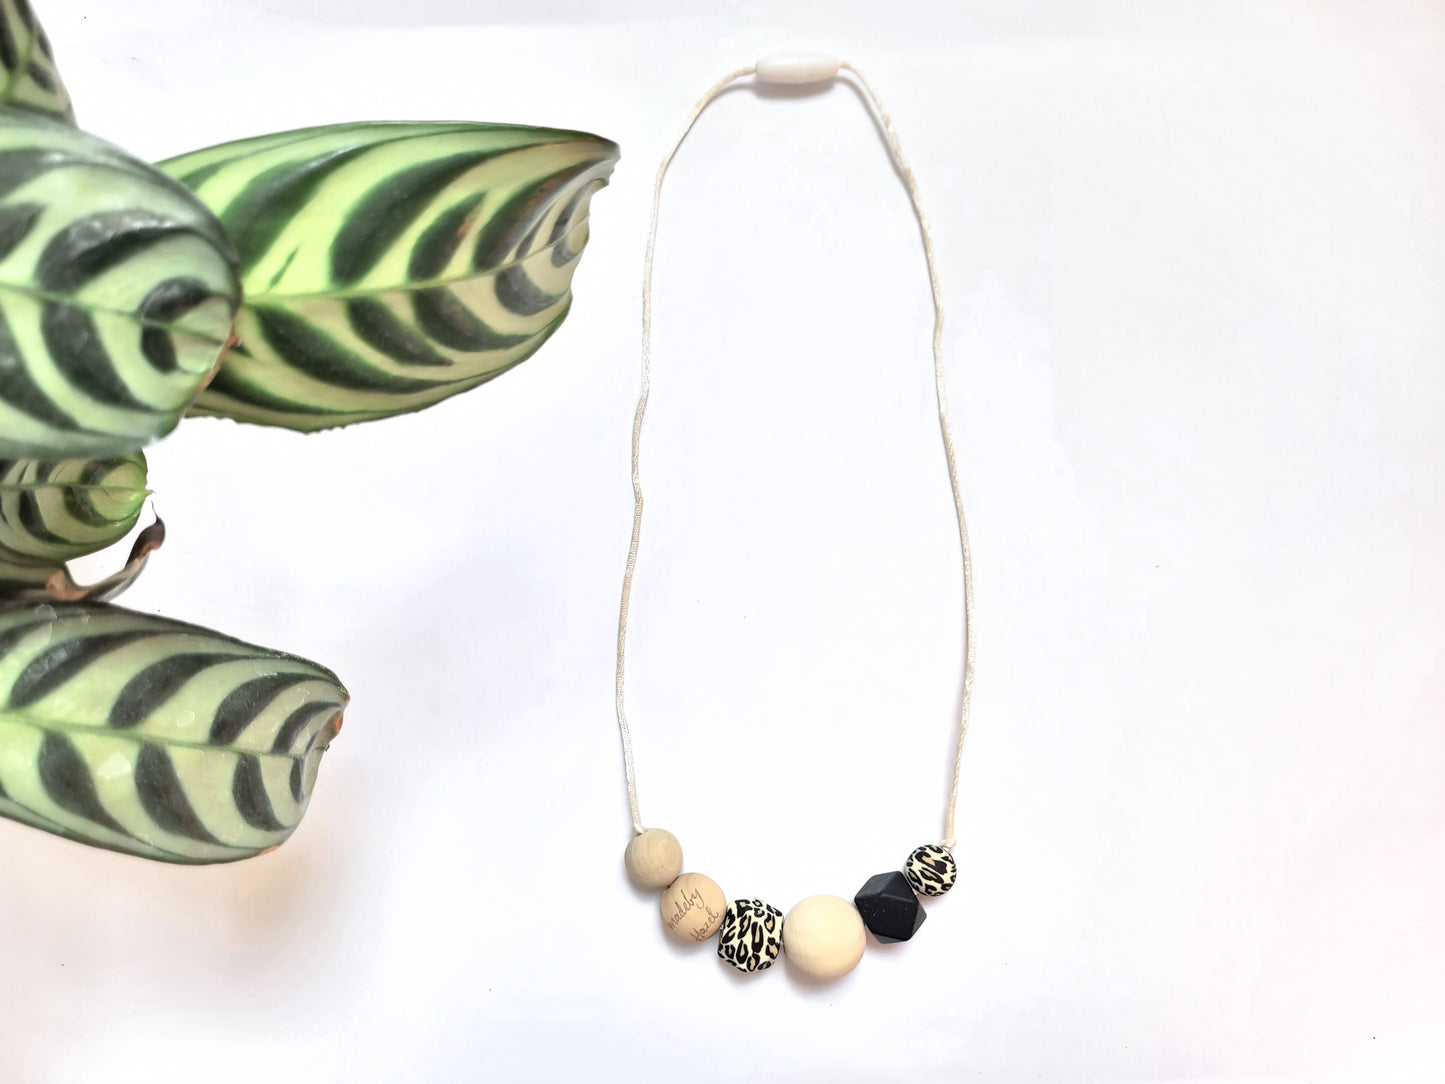 Stylish Nursing necklace Leopard silicone & natural non-toxic wooden beads with white cord from madebyHazel.